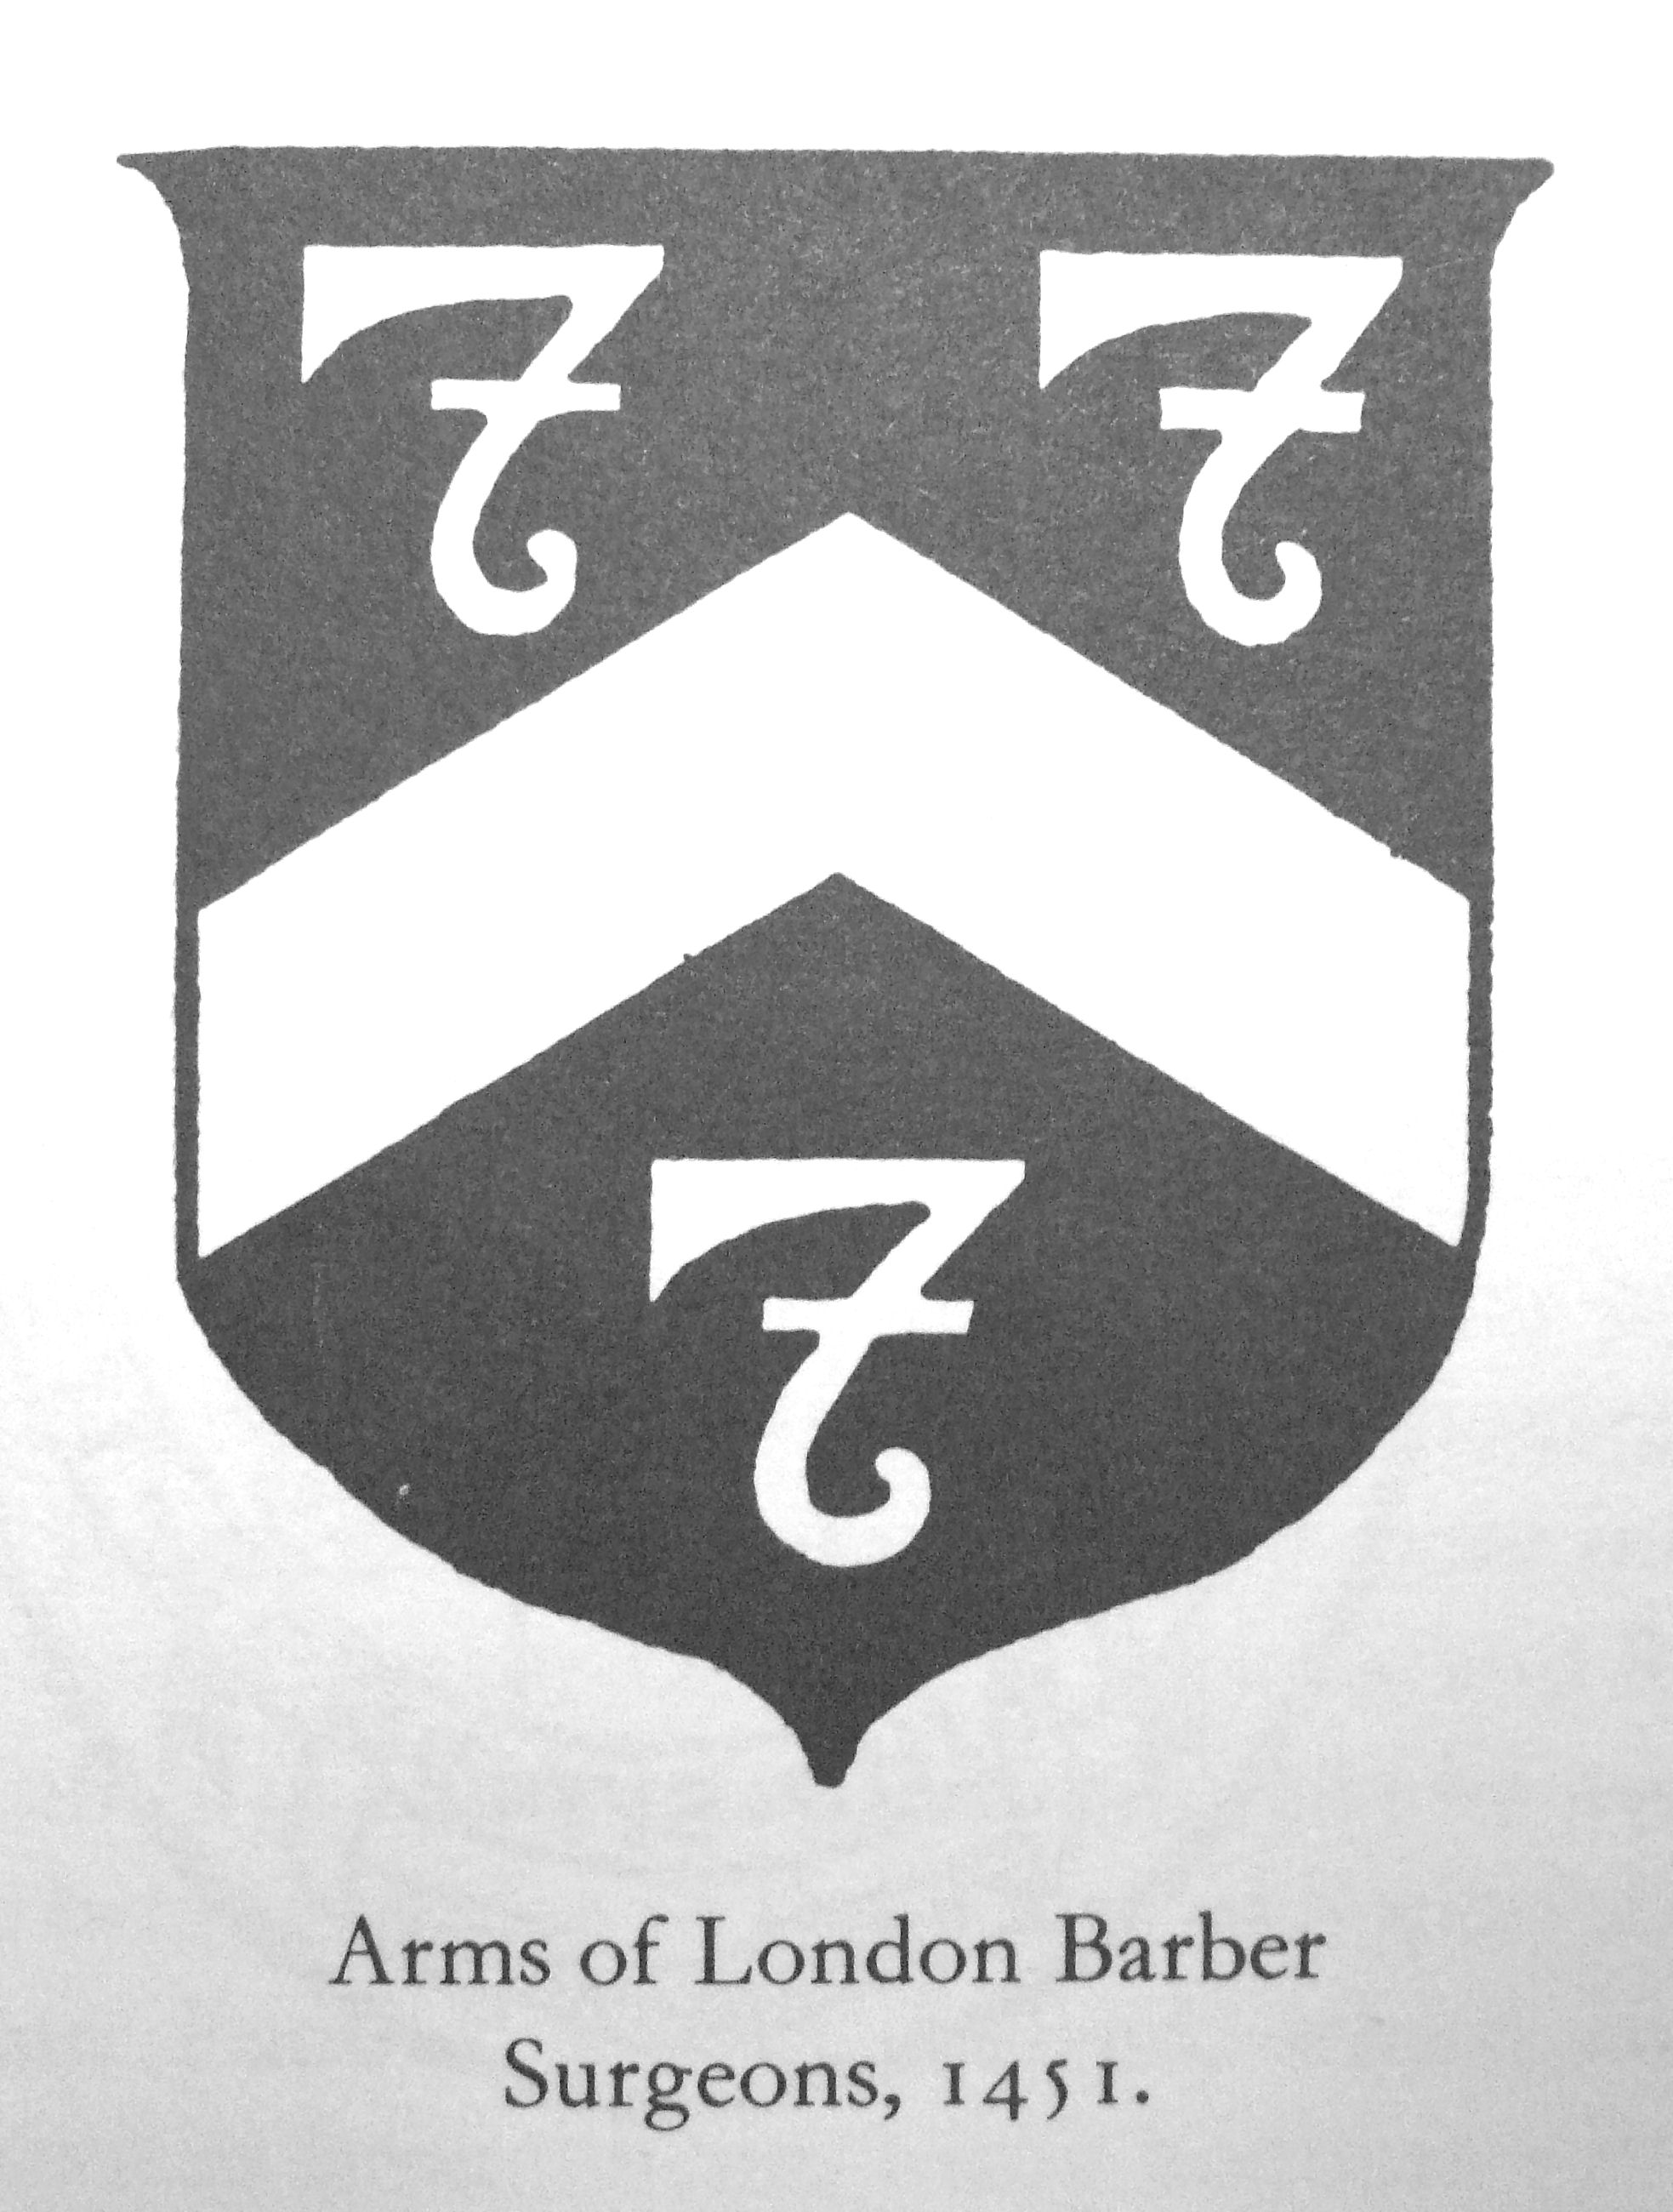 Arms of the Guild of London Barber Surgeons, 1451